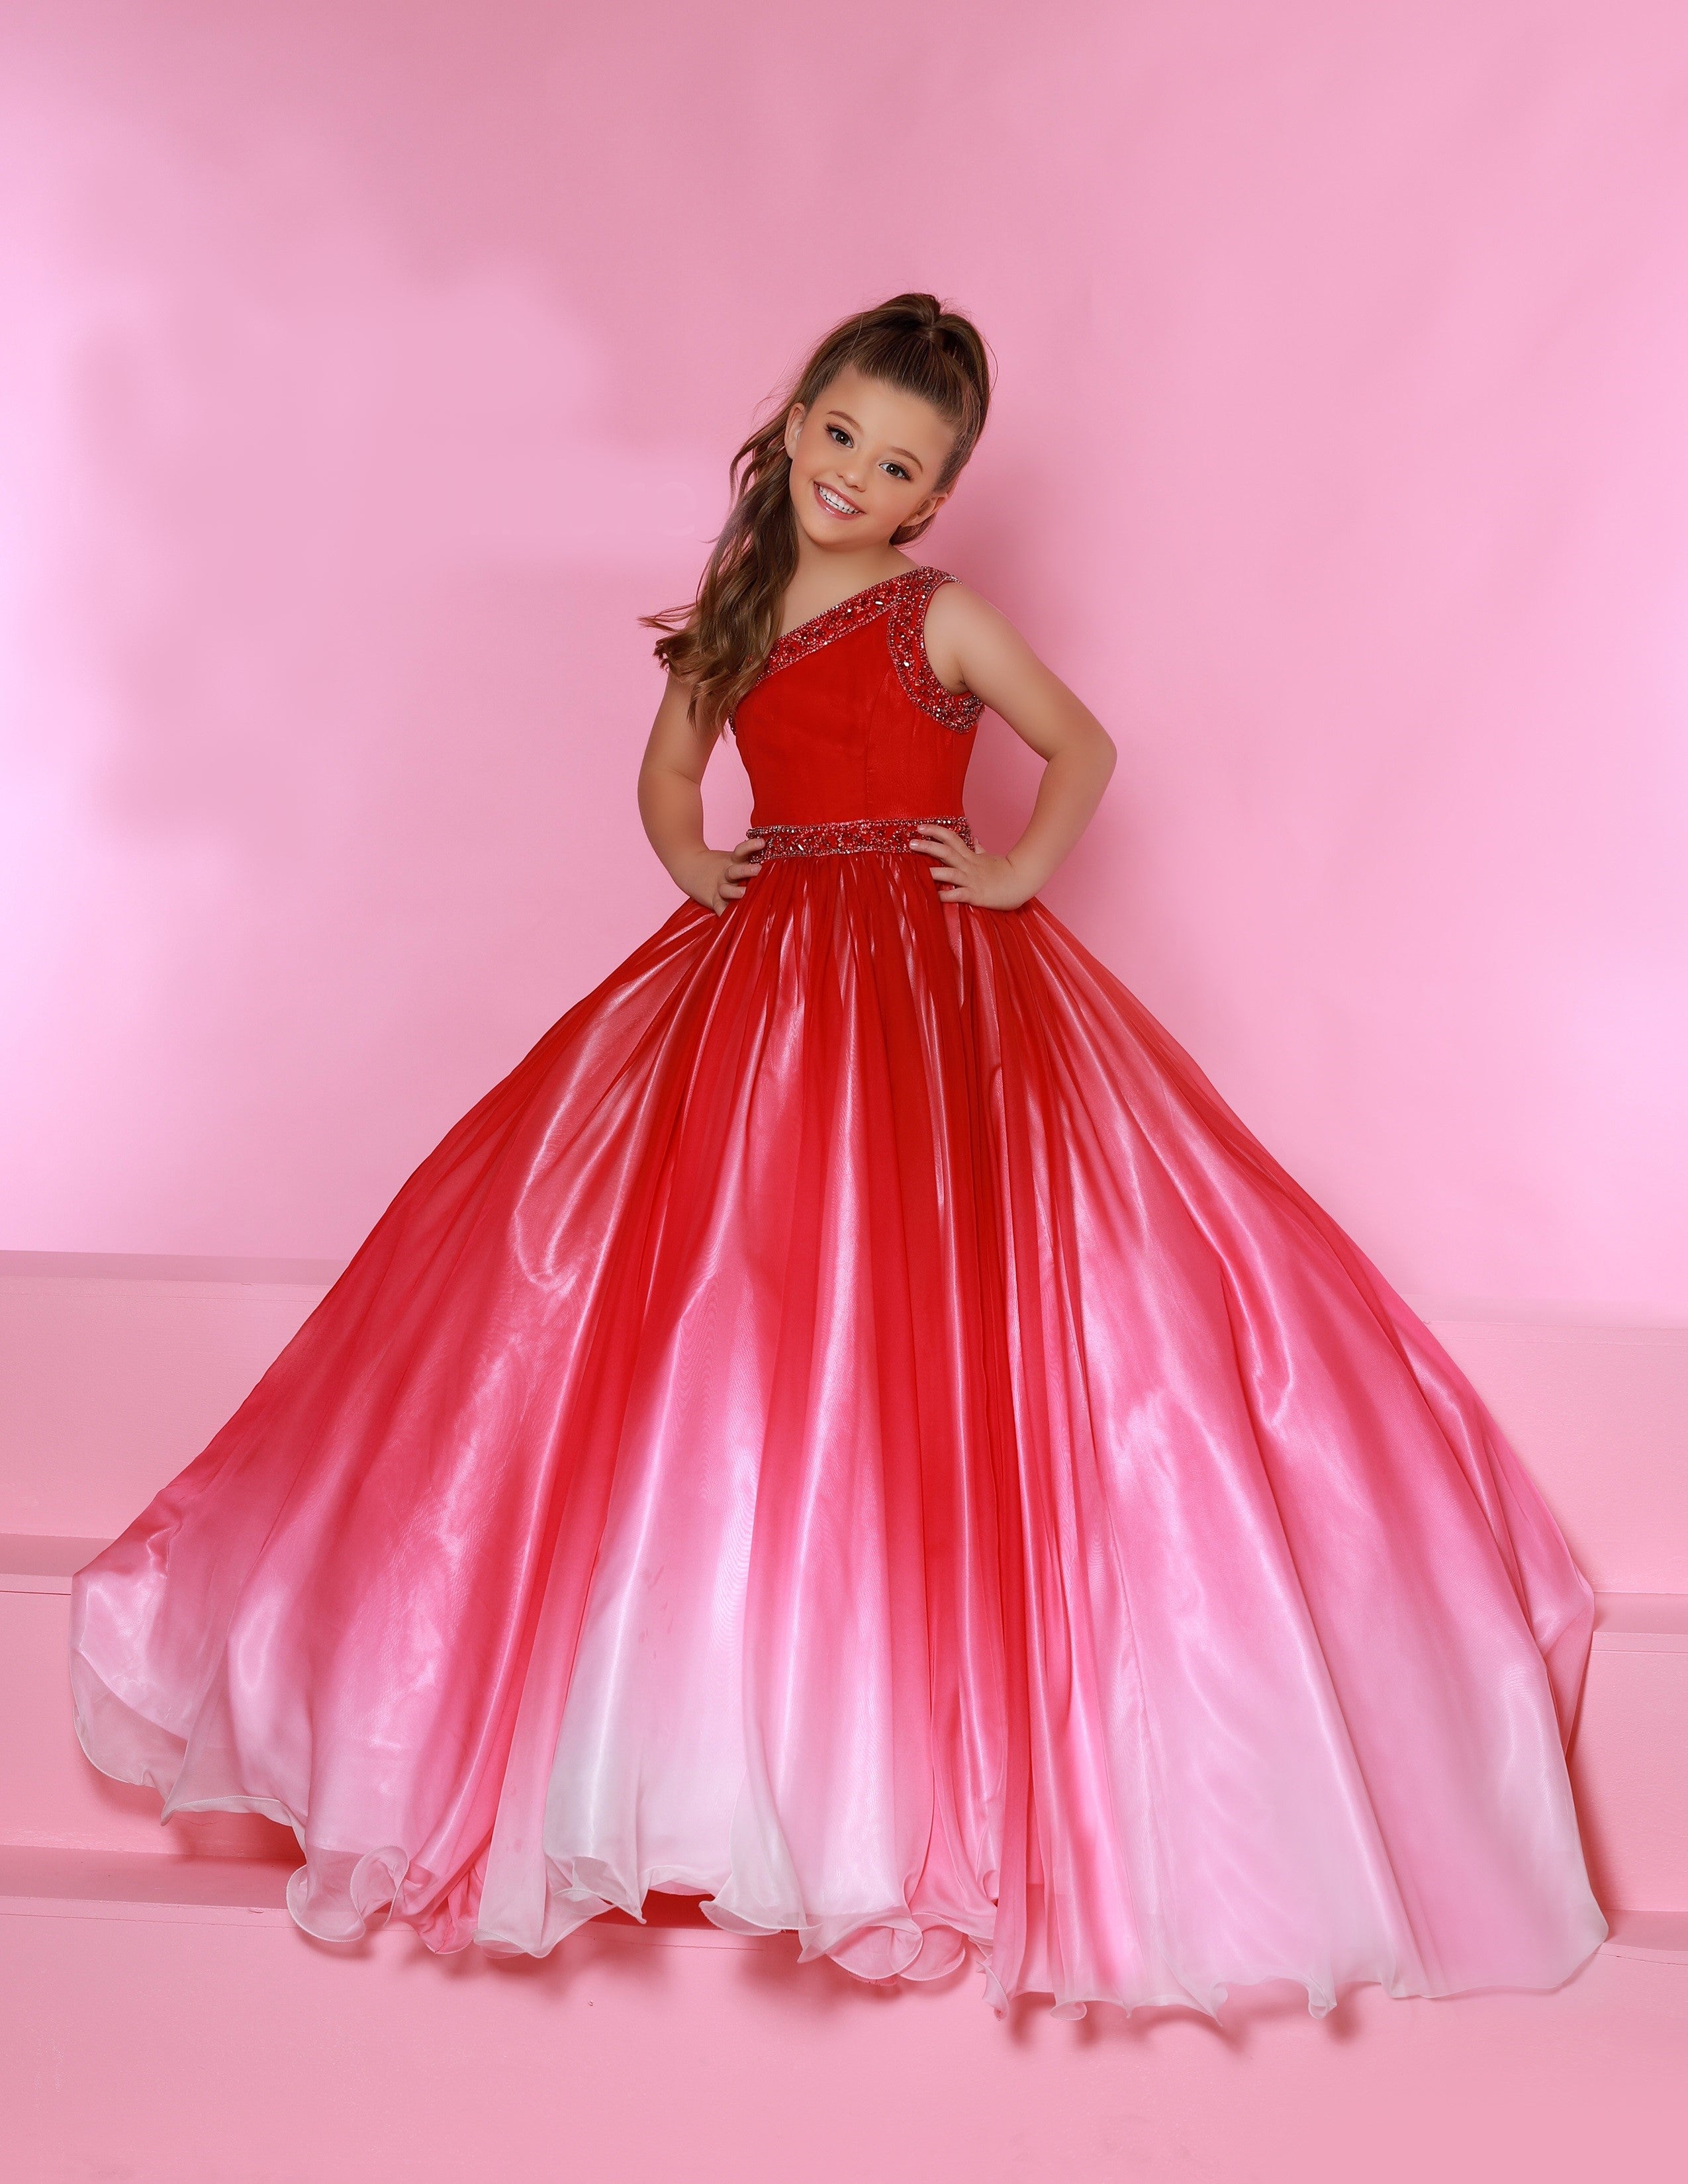 Sugar Kayne C169 Size 10, 12 Long girls Pageant Ballgown Ombre One Shoulder  Dress